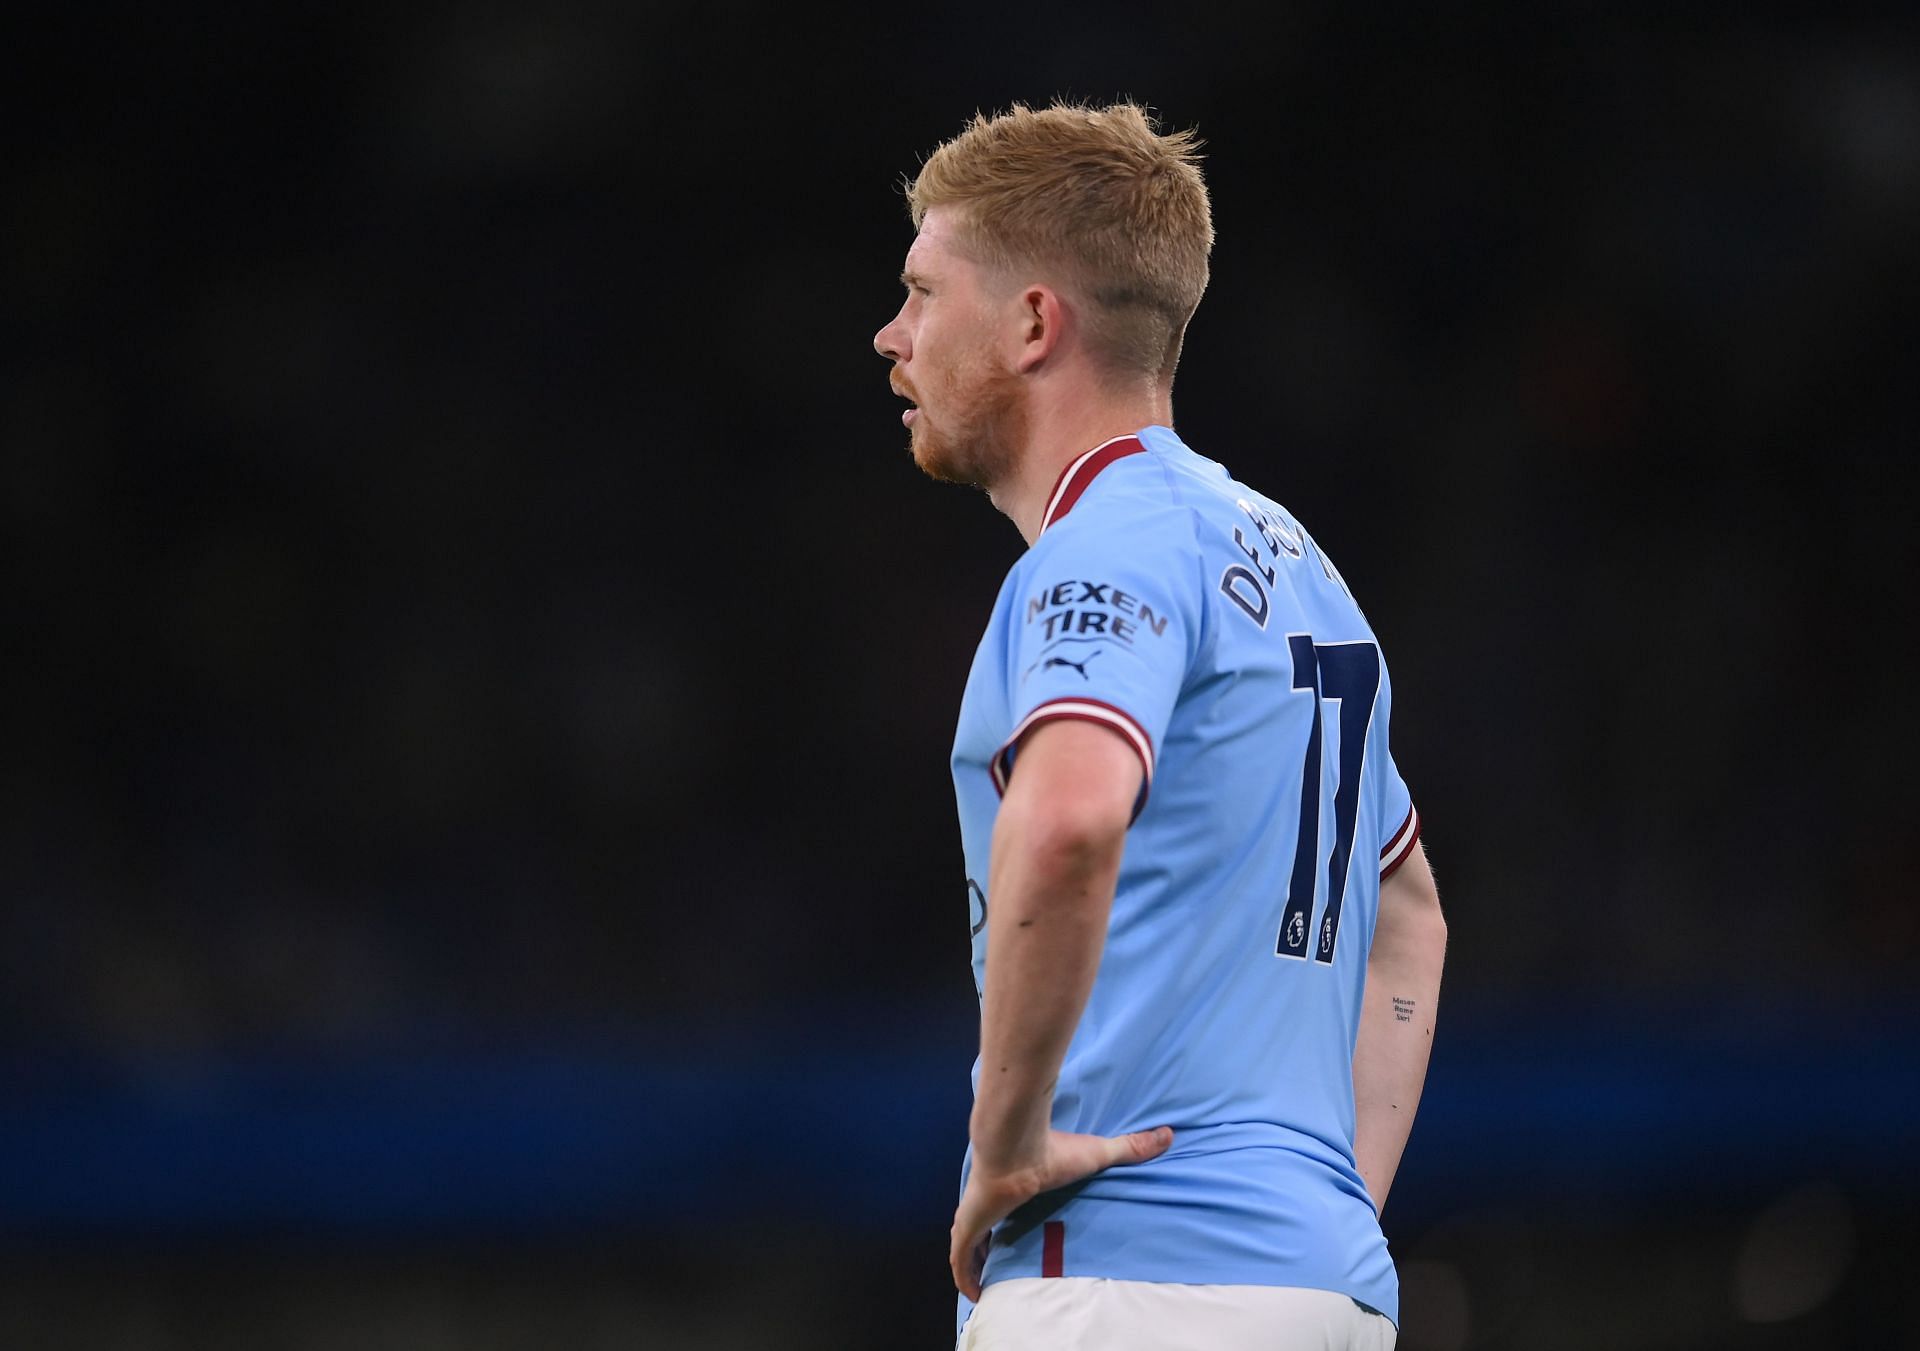 De Bruyne is one of the best players in the Premier League